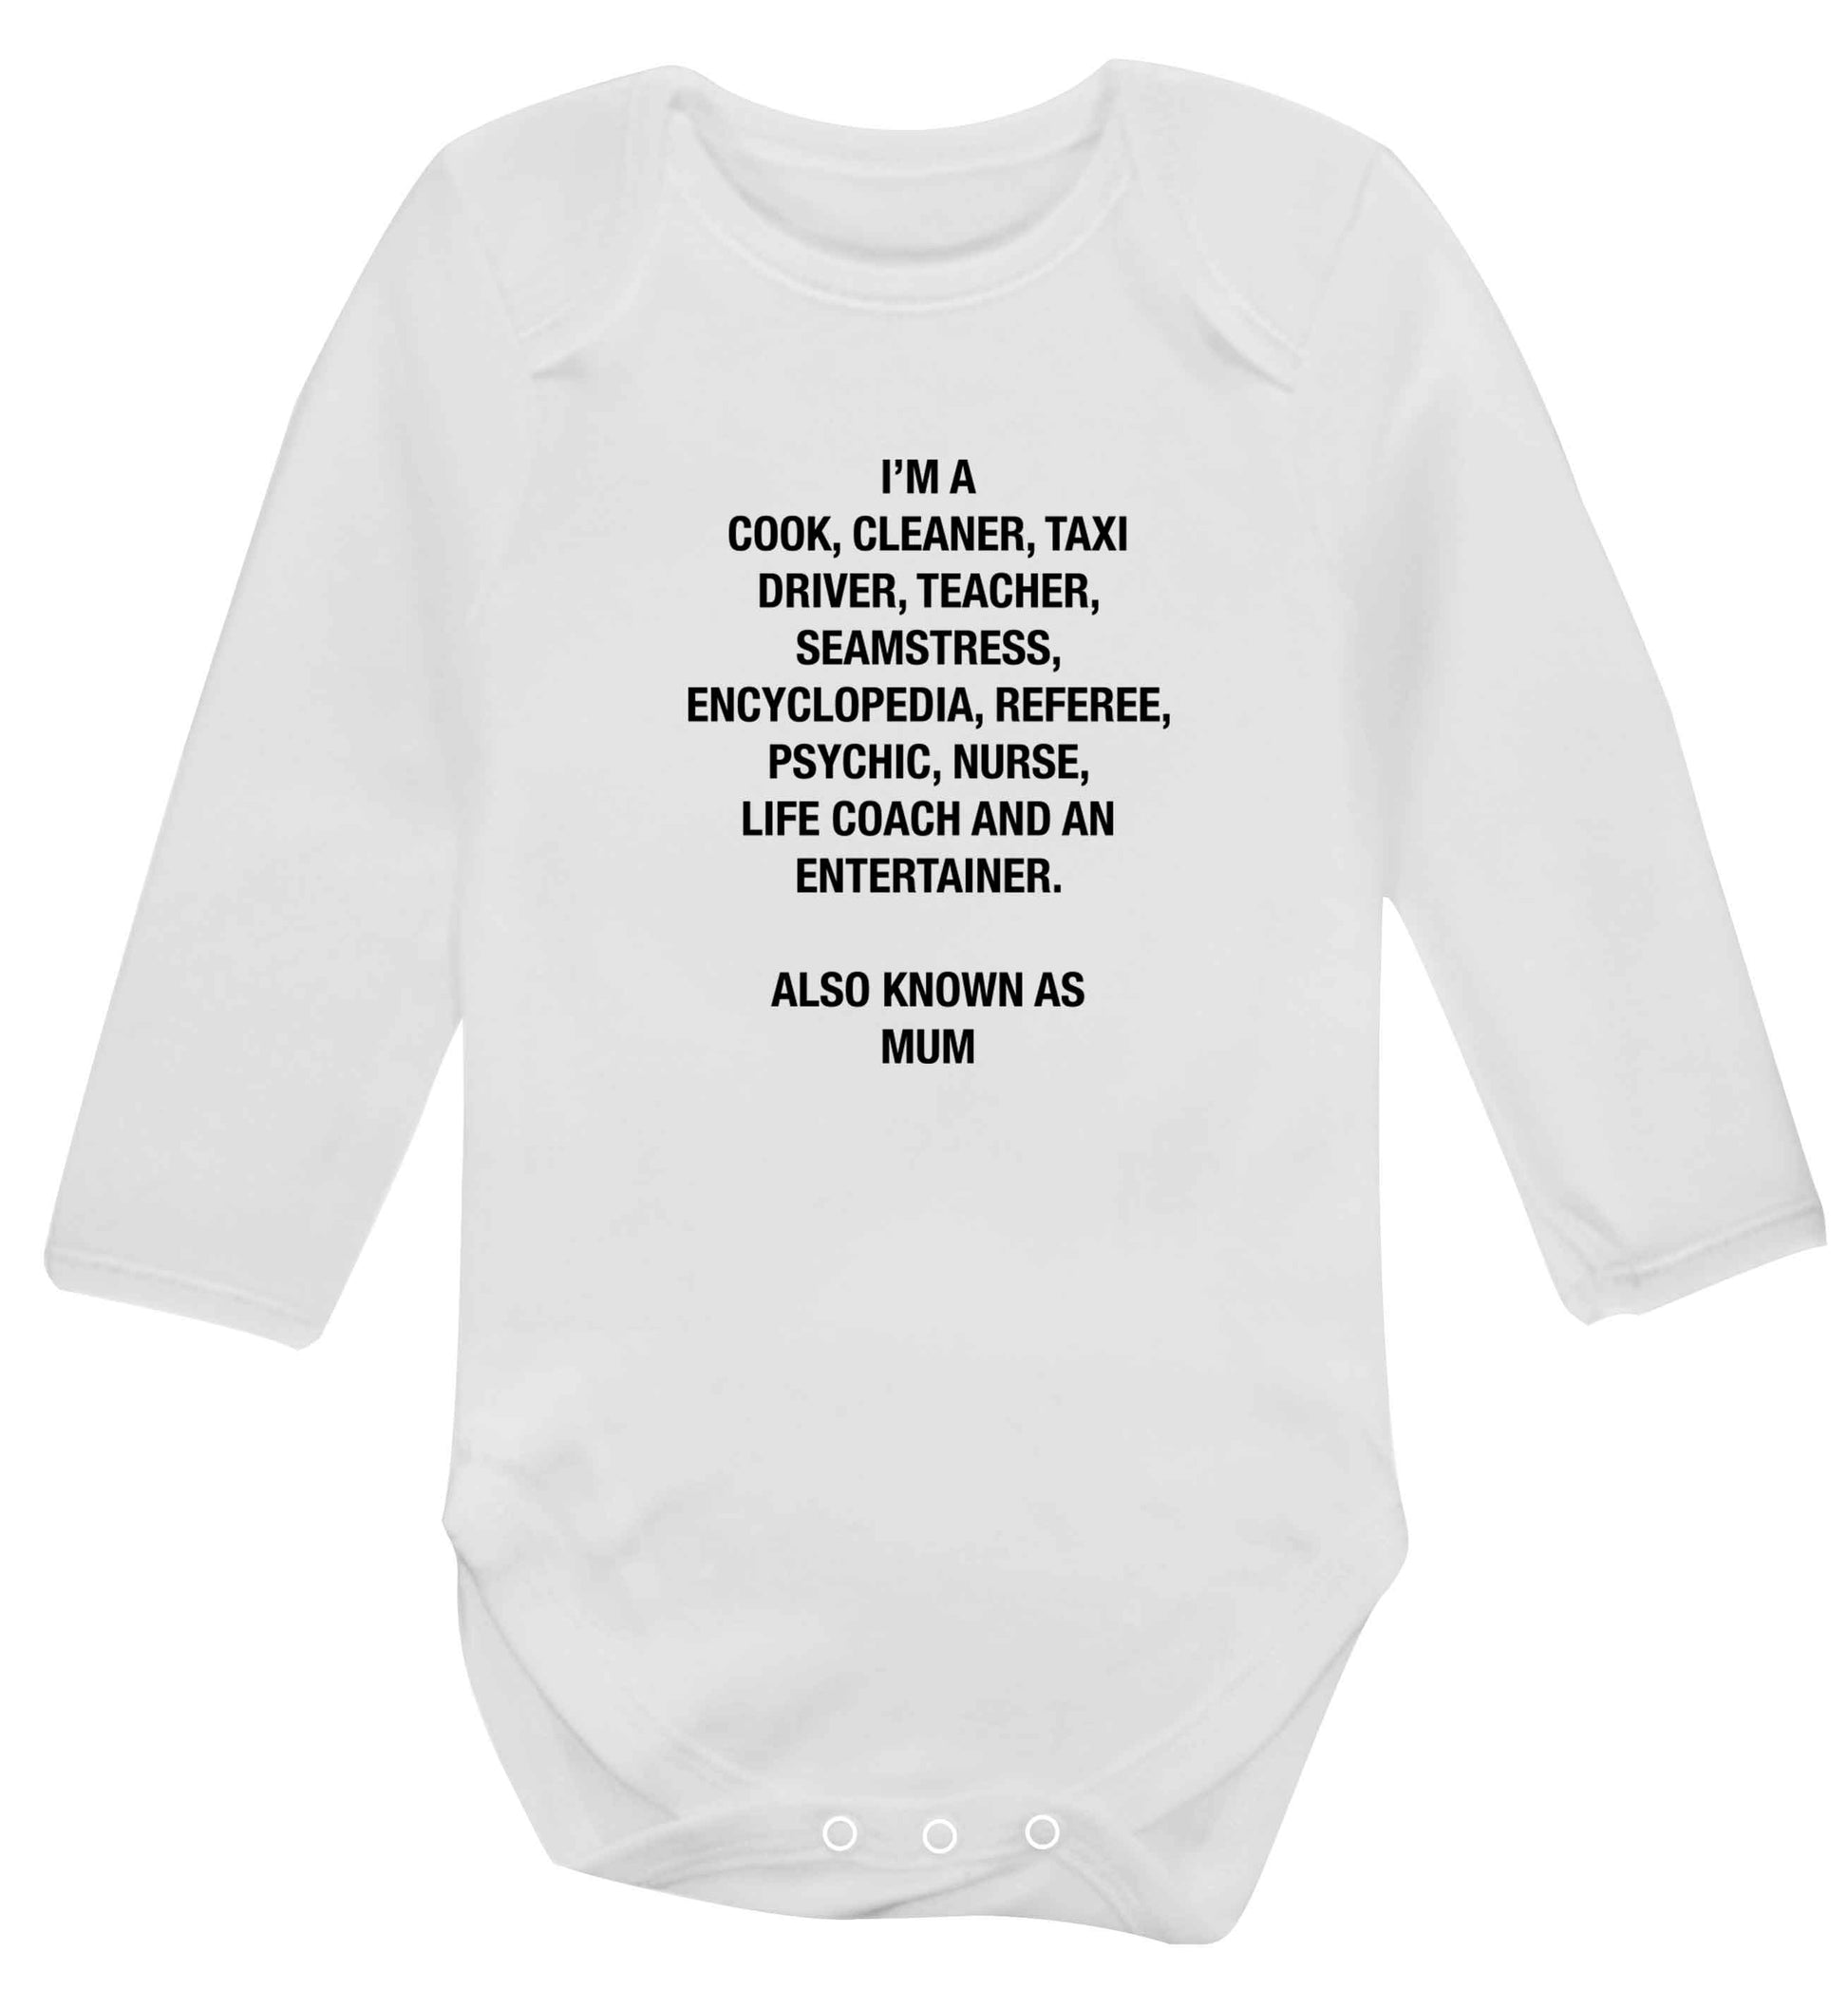 Funny gifts for your mum on mother's dayor her birthday! Mum, cook, cleaner, taxi driver, teacher, seamstress, encyclopedia, referee, psychic, nurse, life coach and entertainer baby vest long sleeved white 6-12 months